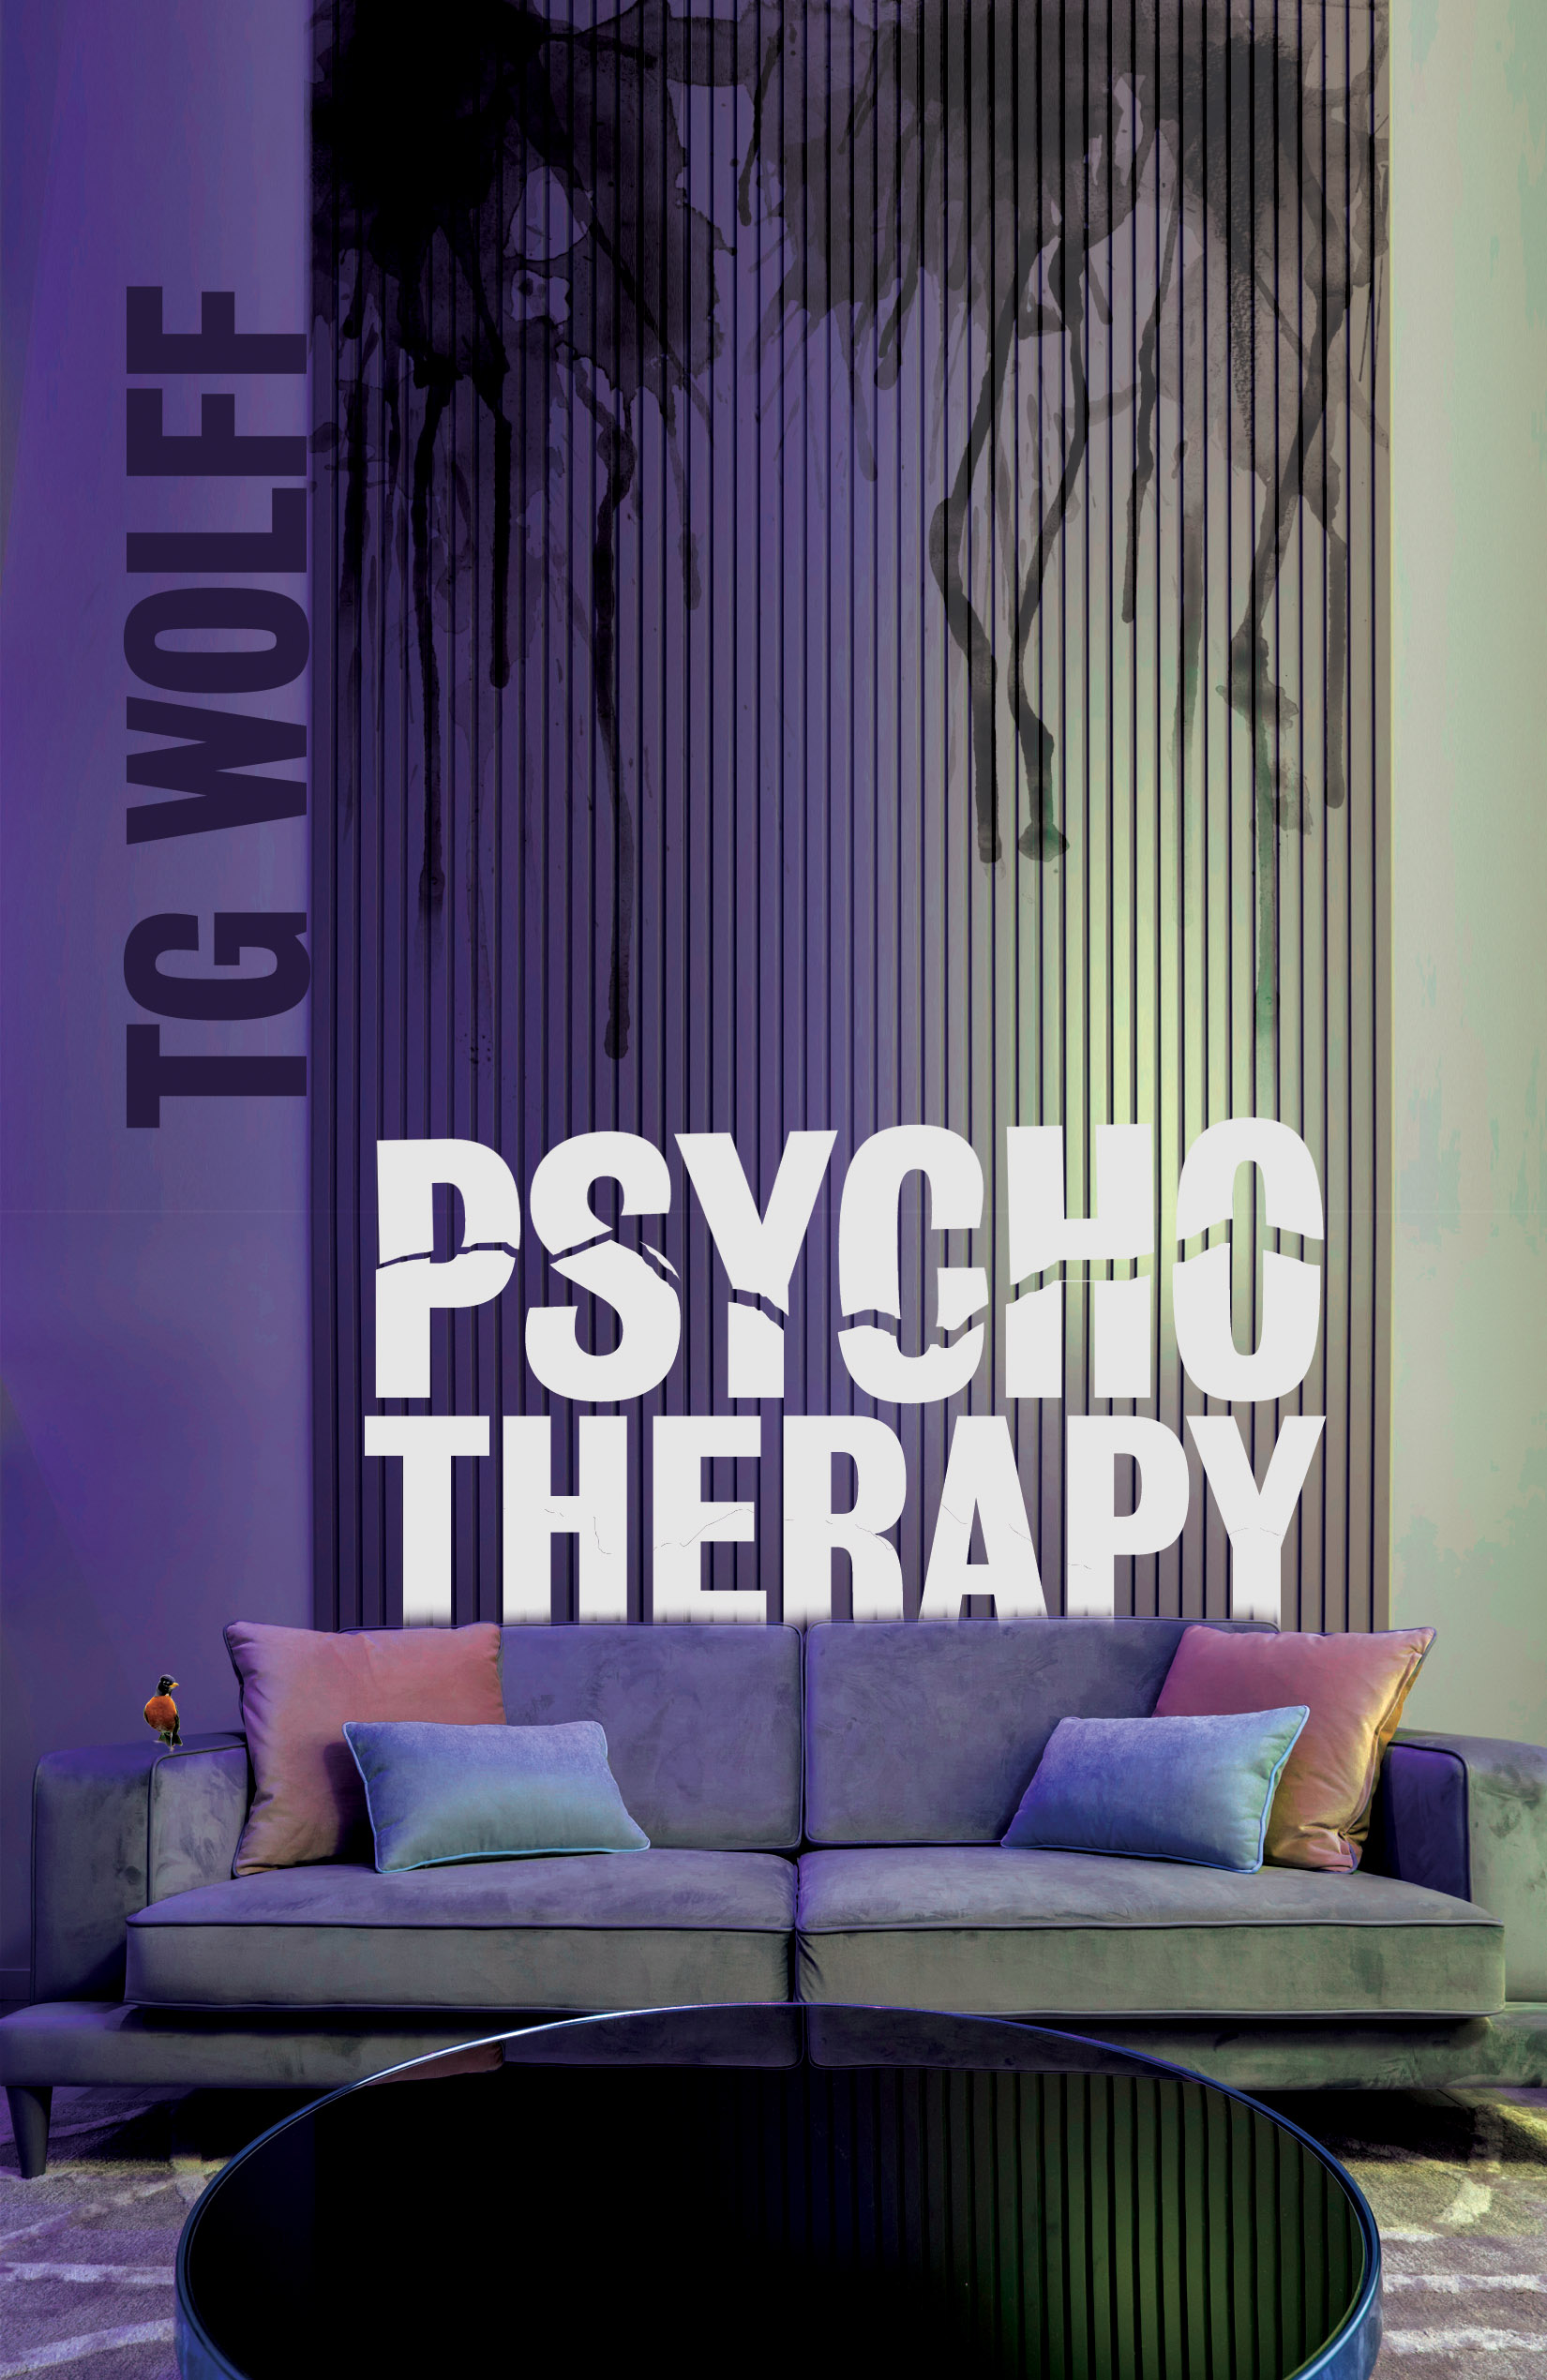 Psycho Therapy by TG Wolff